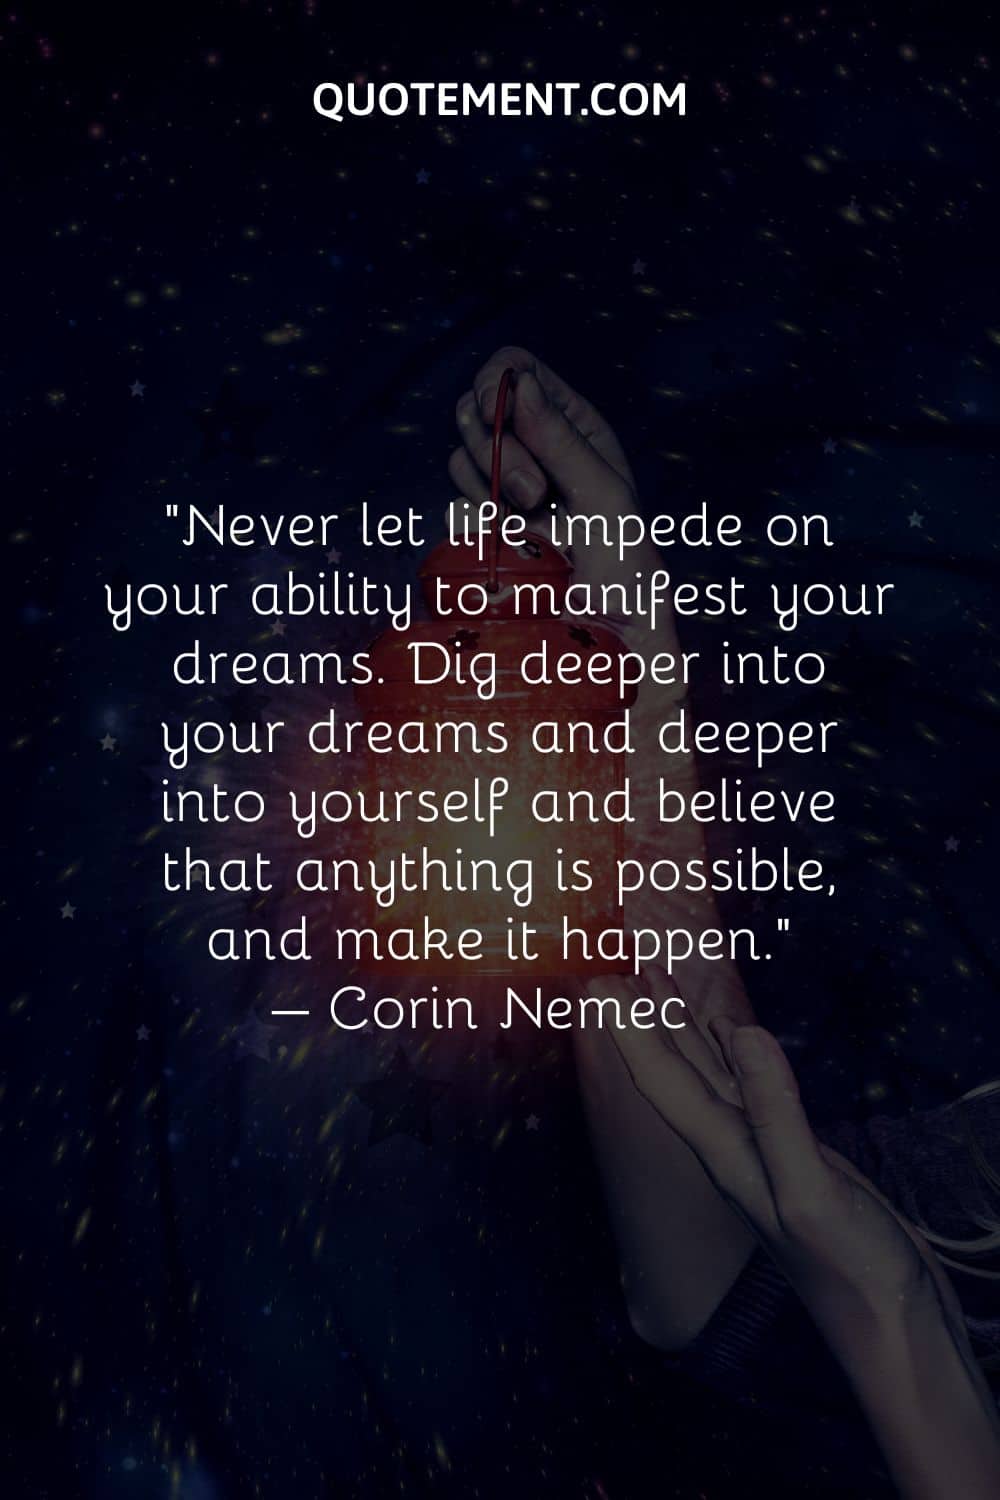 Never let life impede on your ability to manifest your dreams